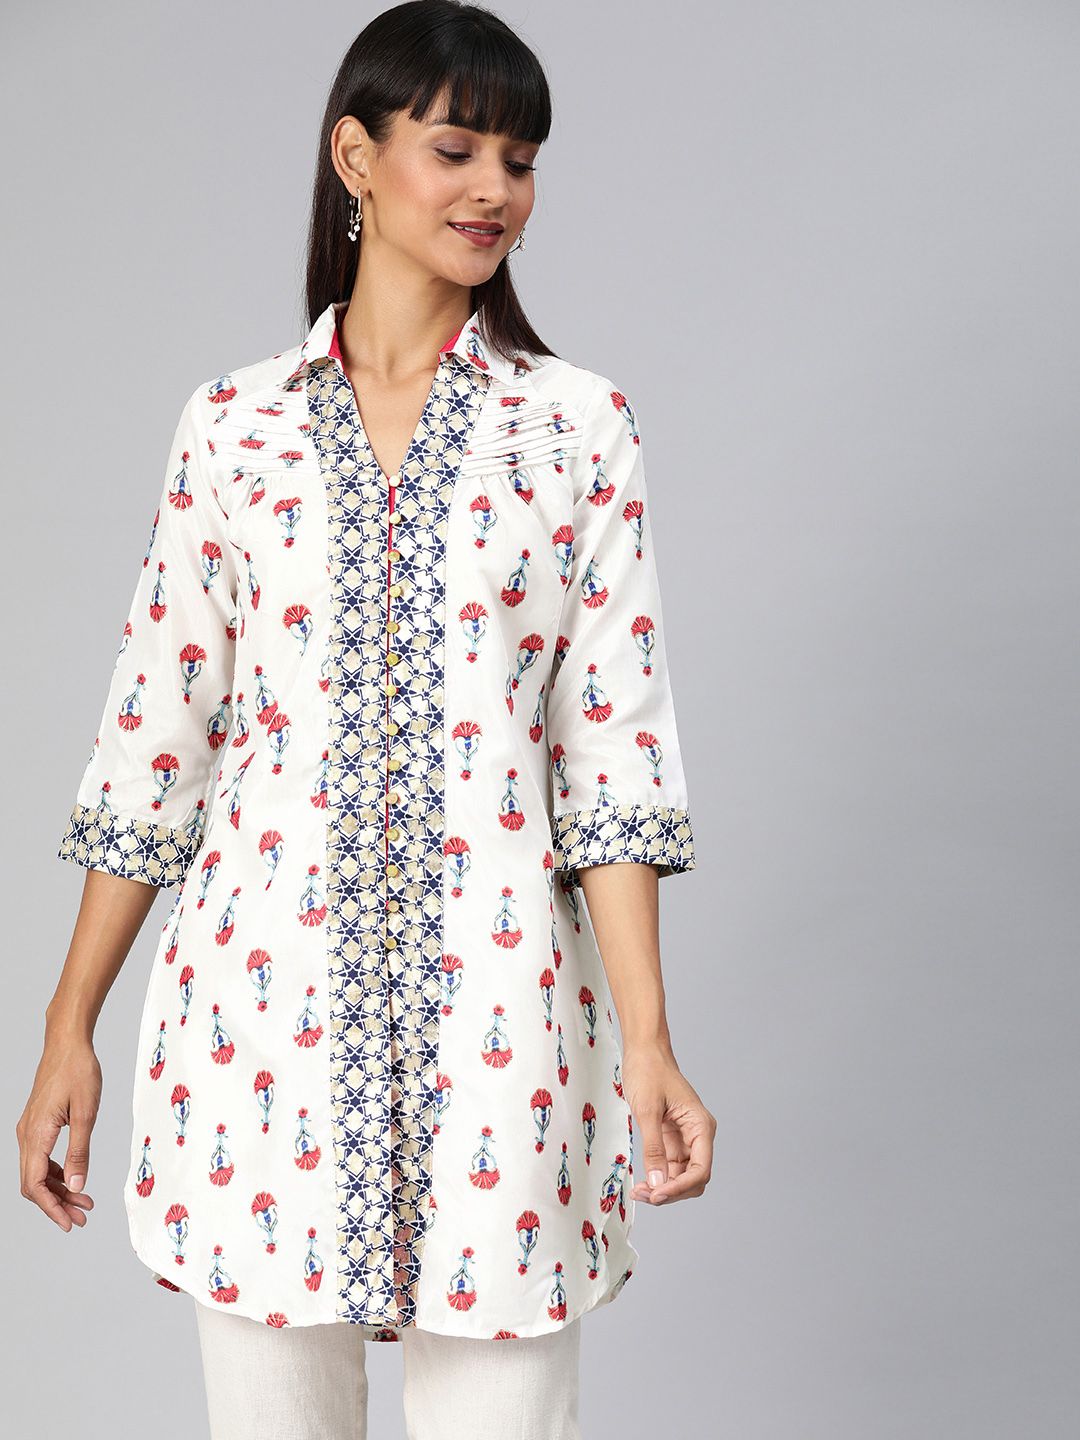 AKKRITI BY PANTALOONS Women White & Red Floral Printed Tunic Price in India